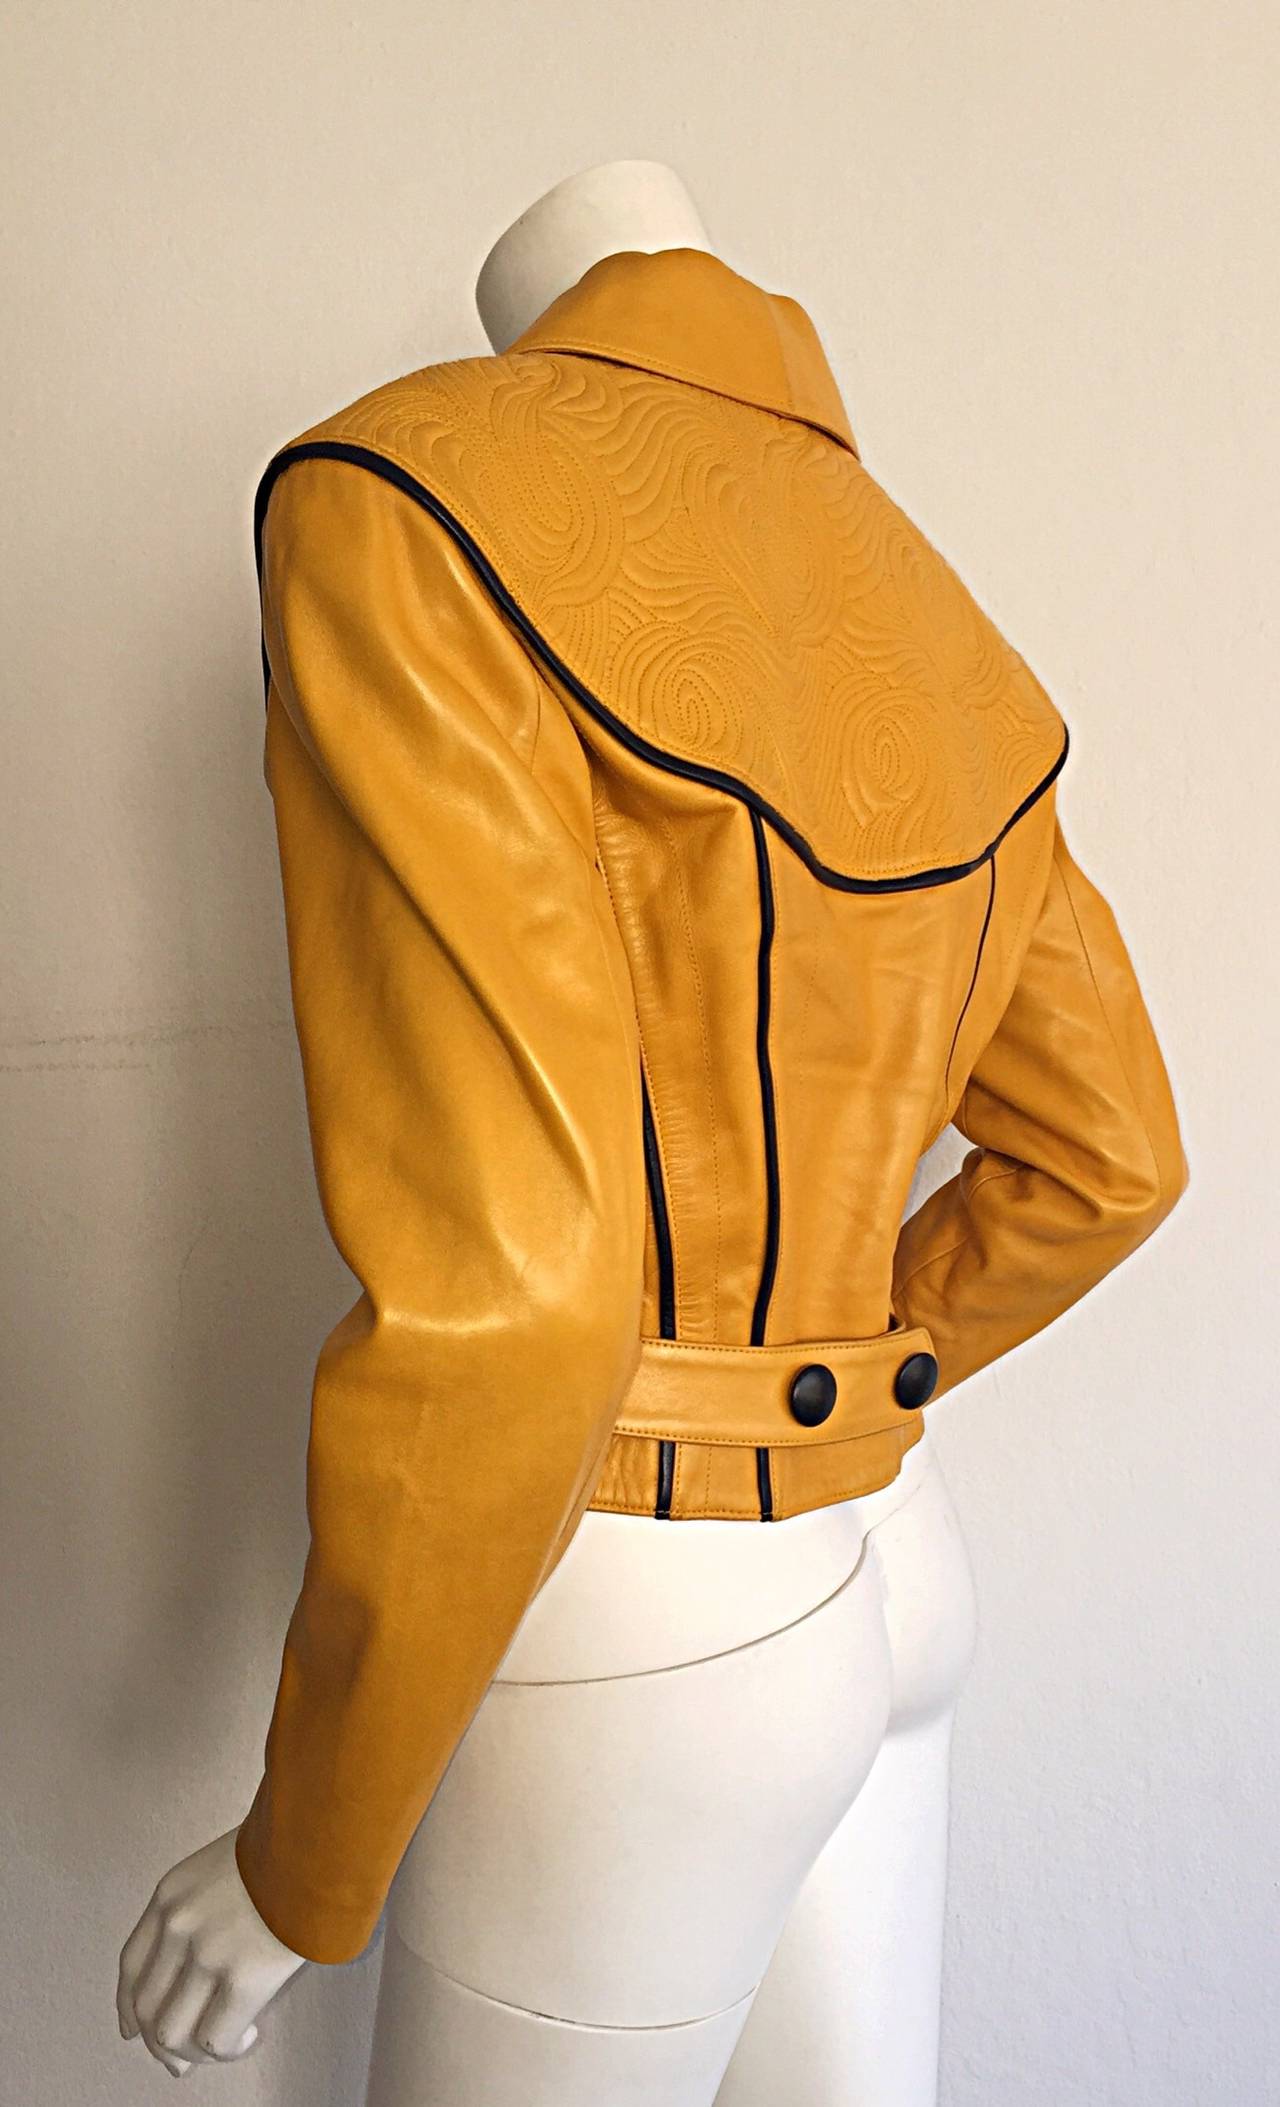 Rare Vintage Jean Claude Jitrois Mustard Yellow Butter Soft Leather Jacket 1